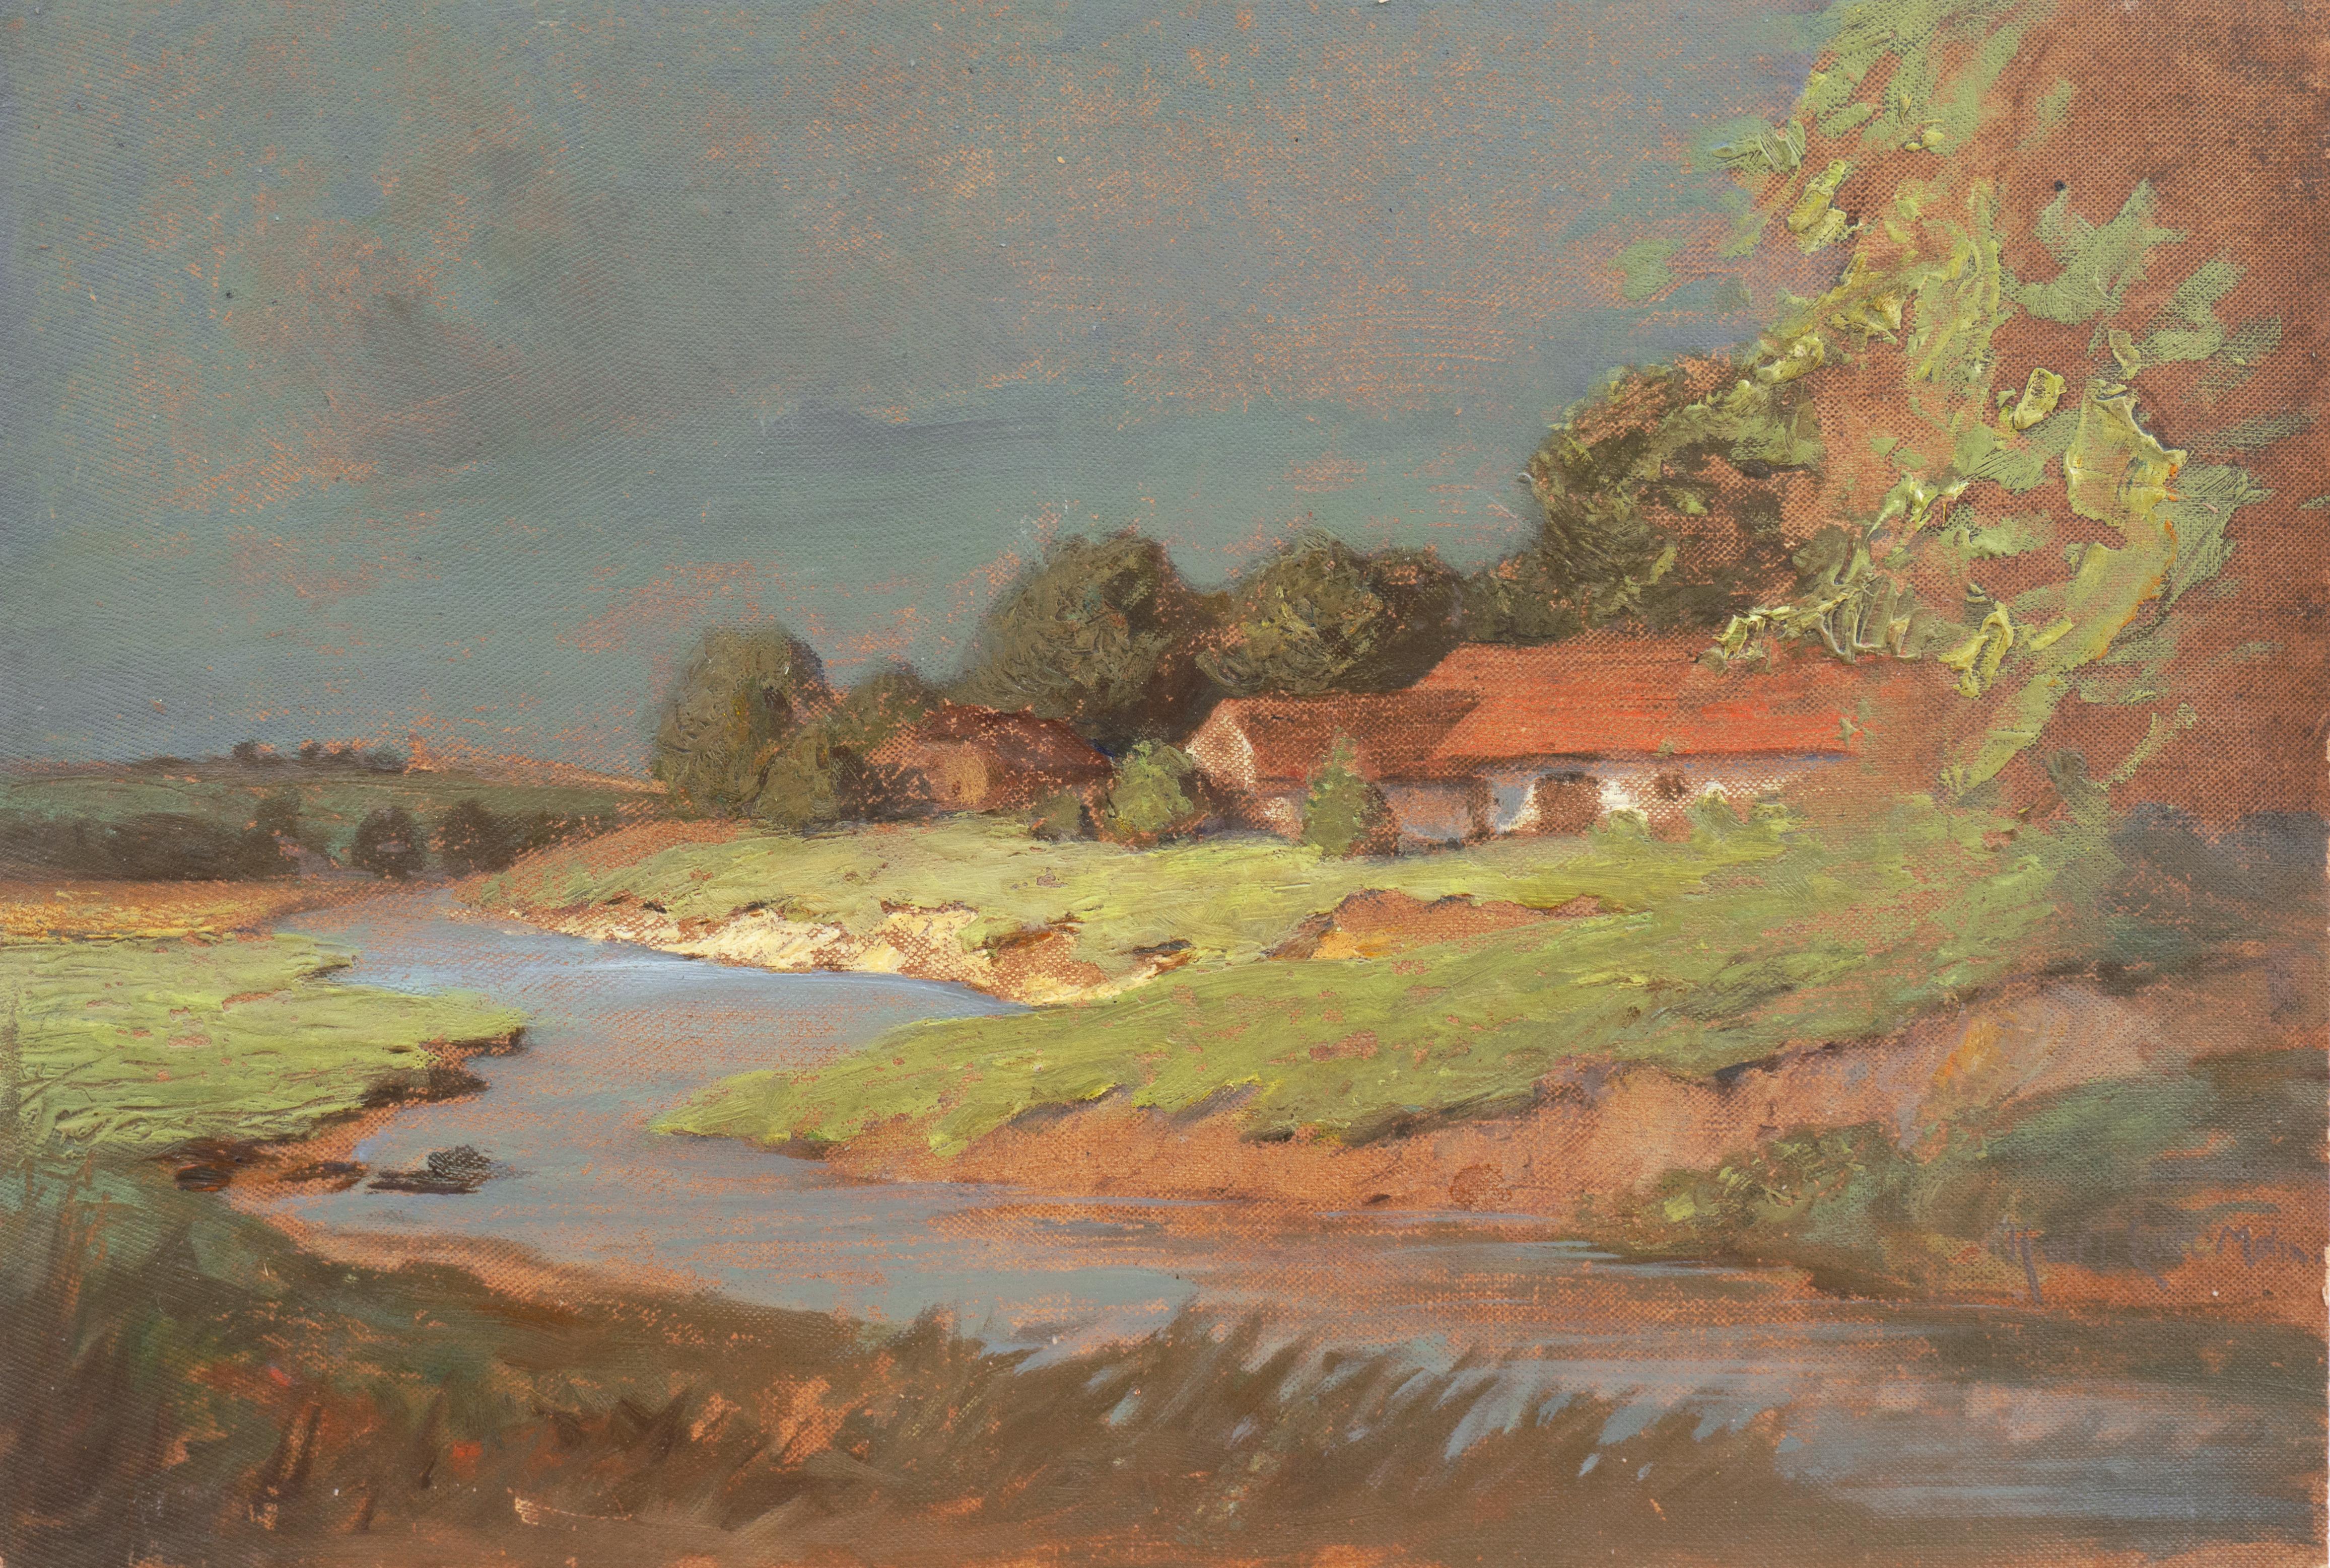 'Hungarian Landscape with Farmhouse', Munich School, National Academy, Budapest